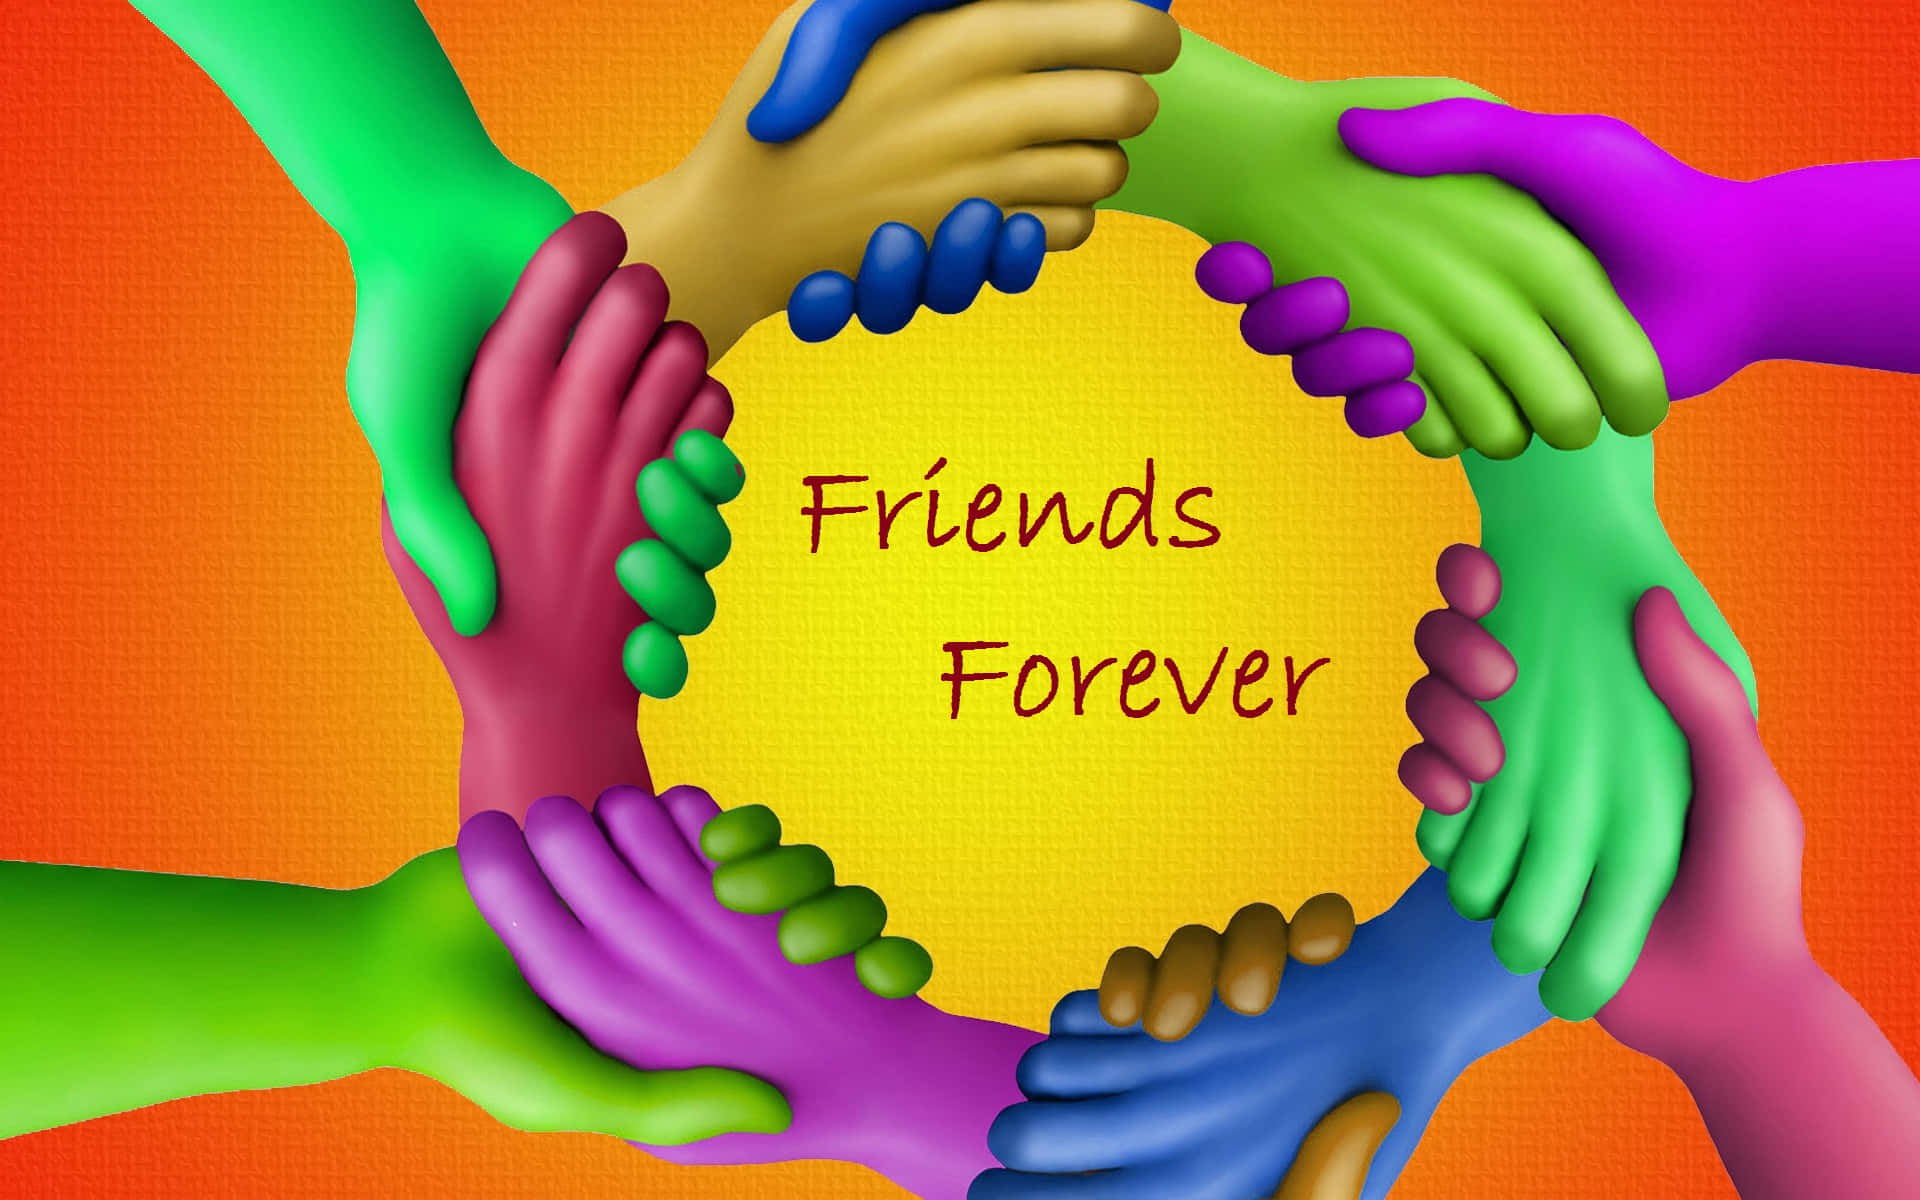 True friends are forever!